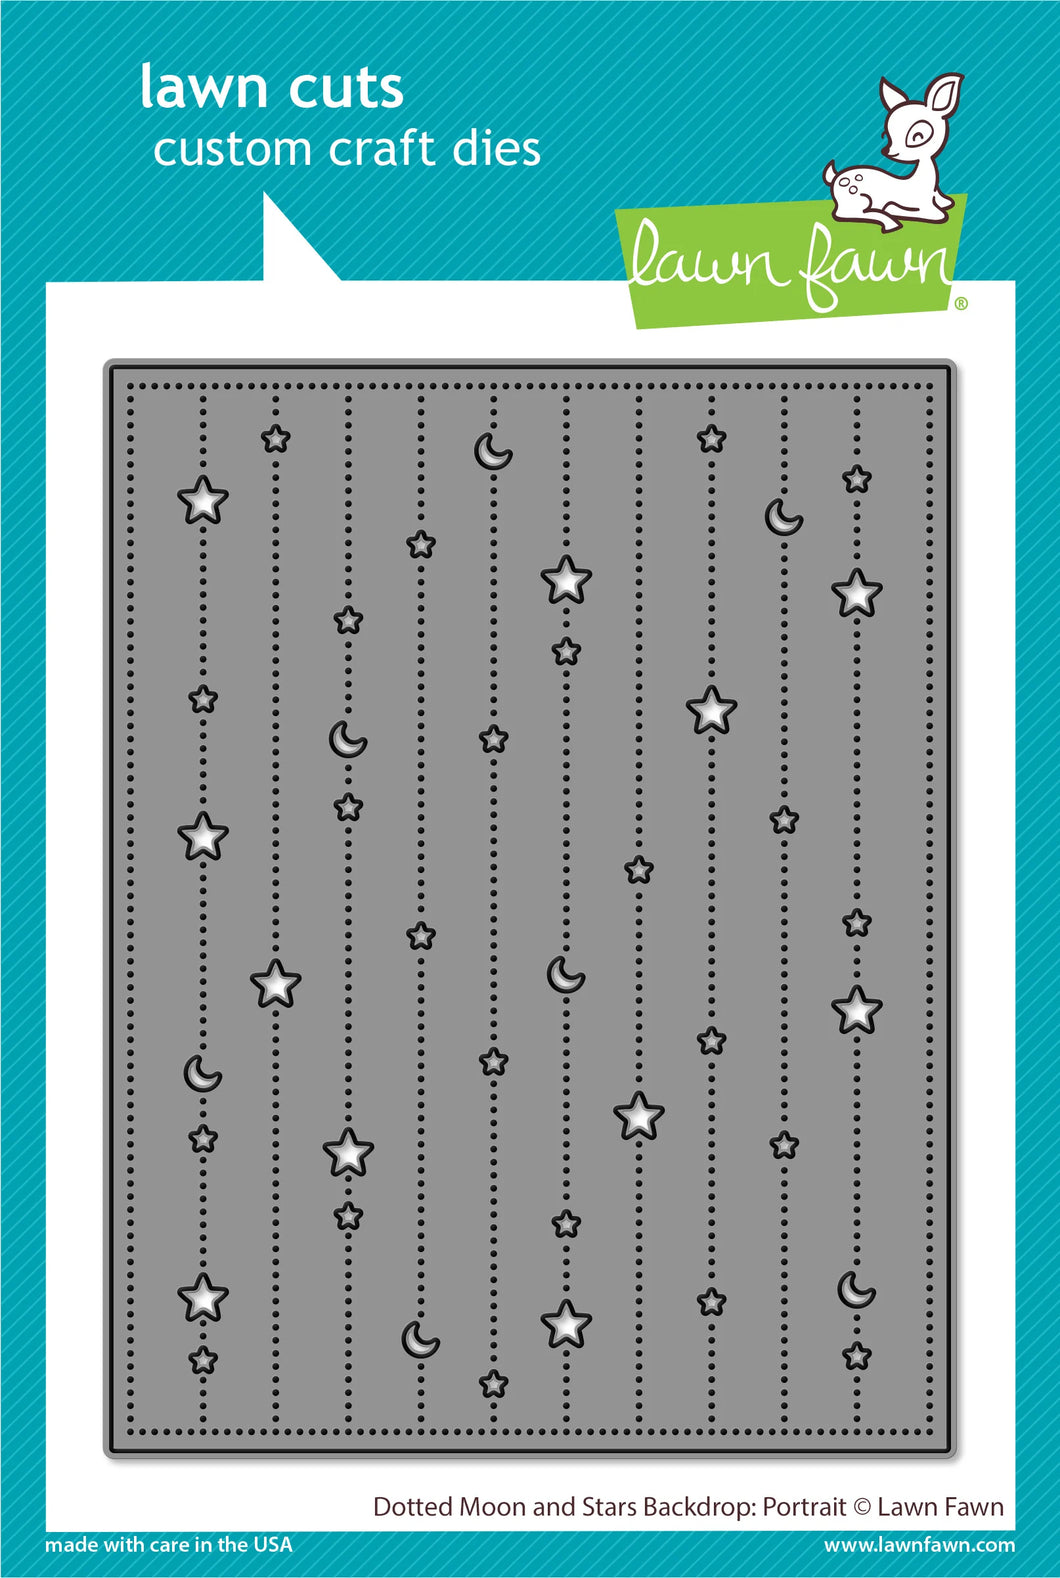 Lawn Fawn - dotted moon and stars backdrop: portrait - Lawn Cuts - Dies